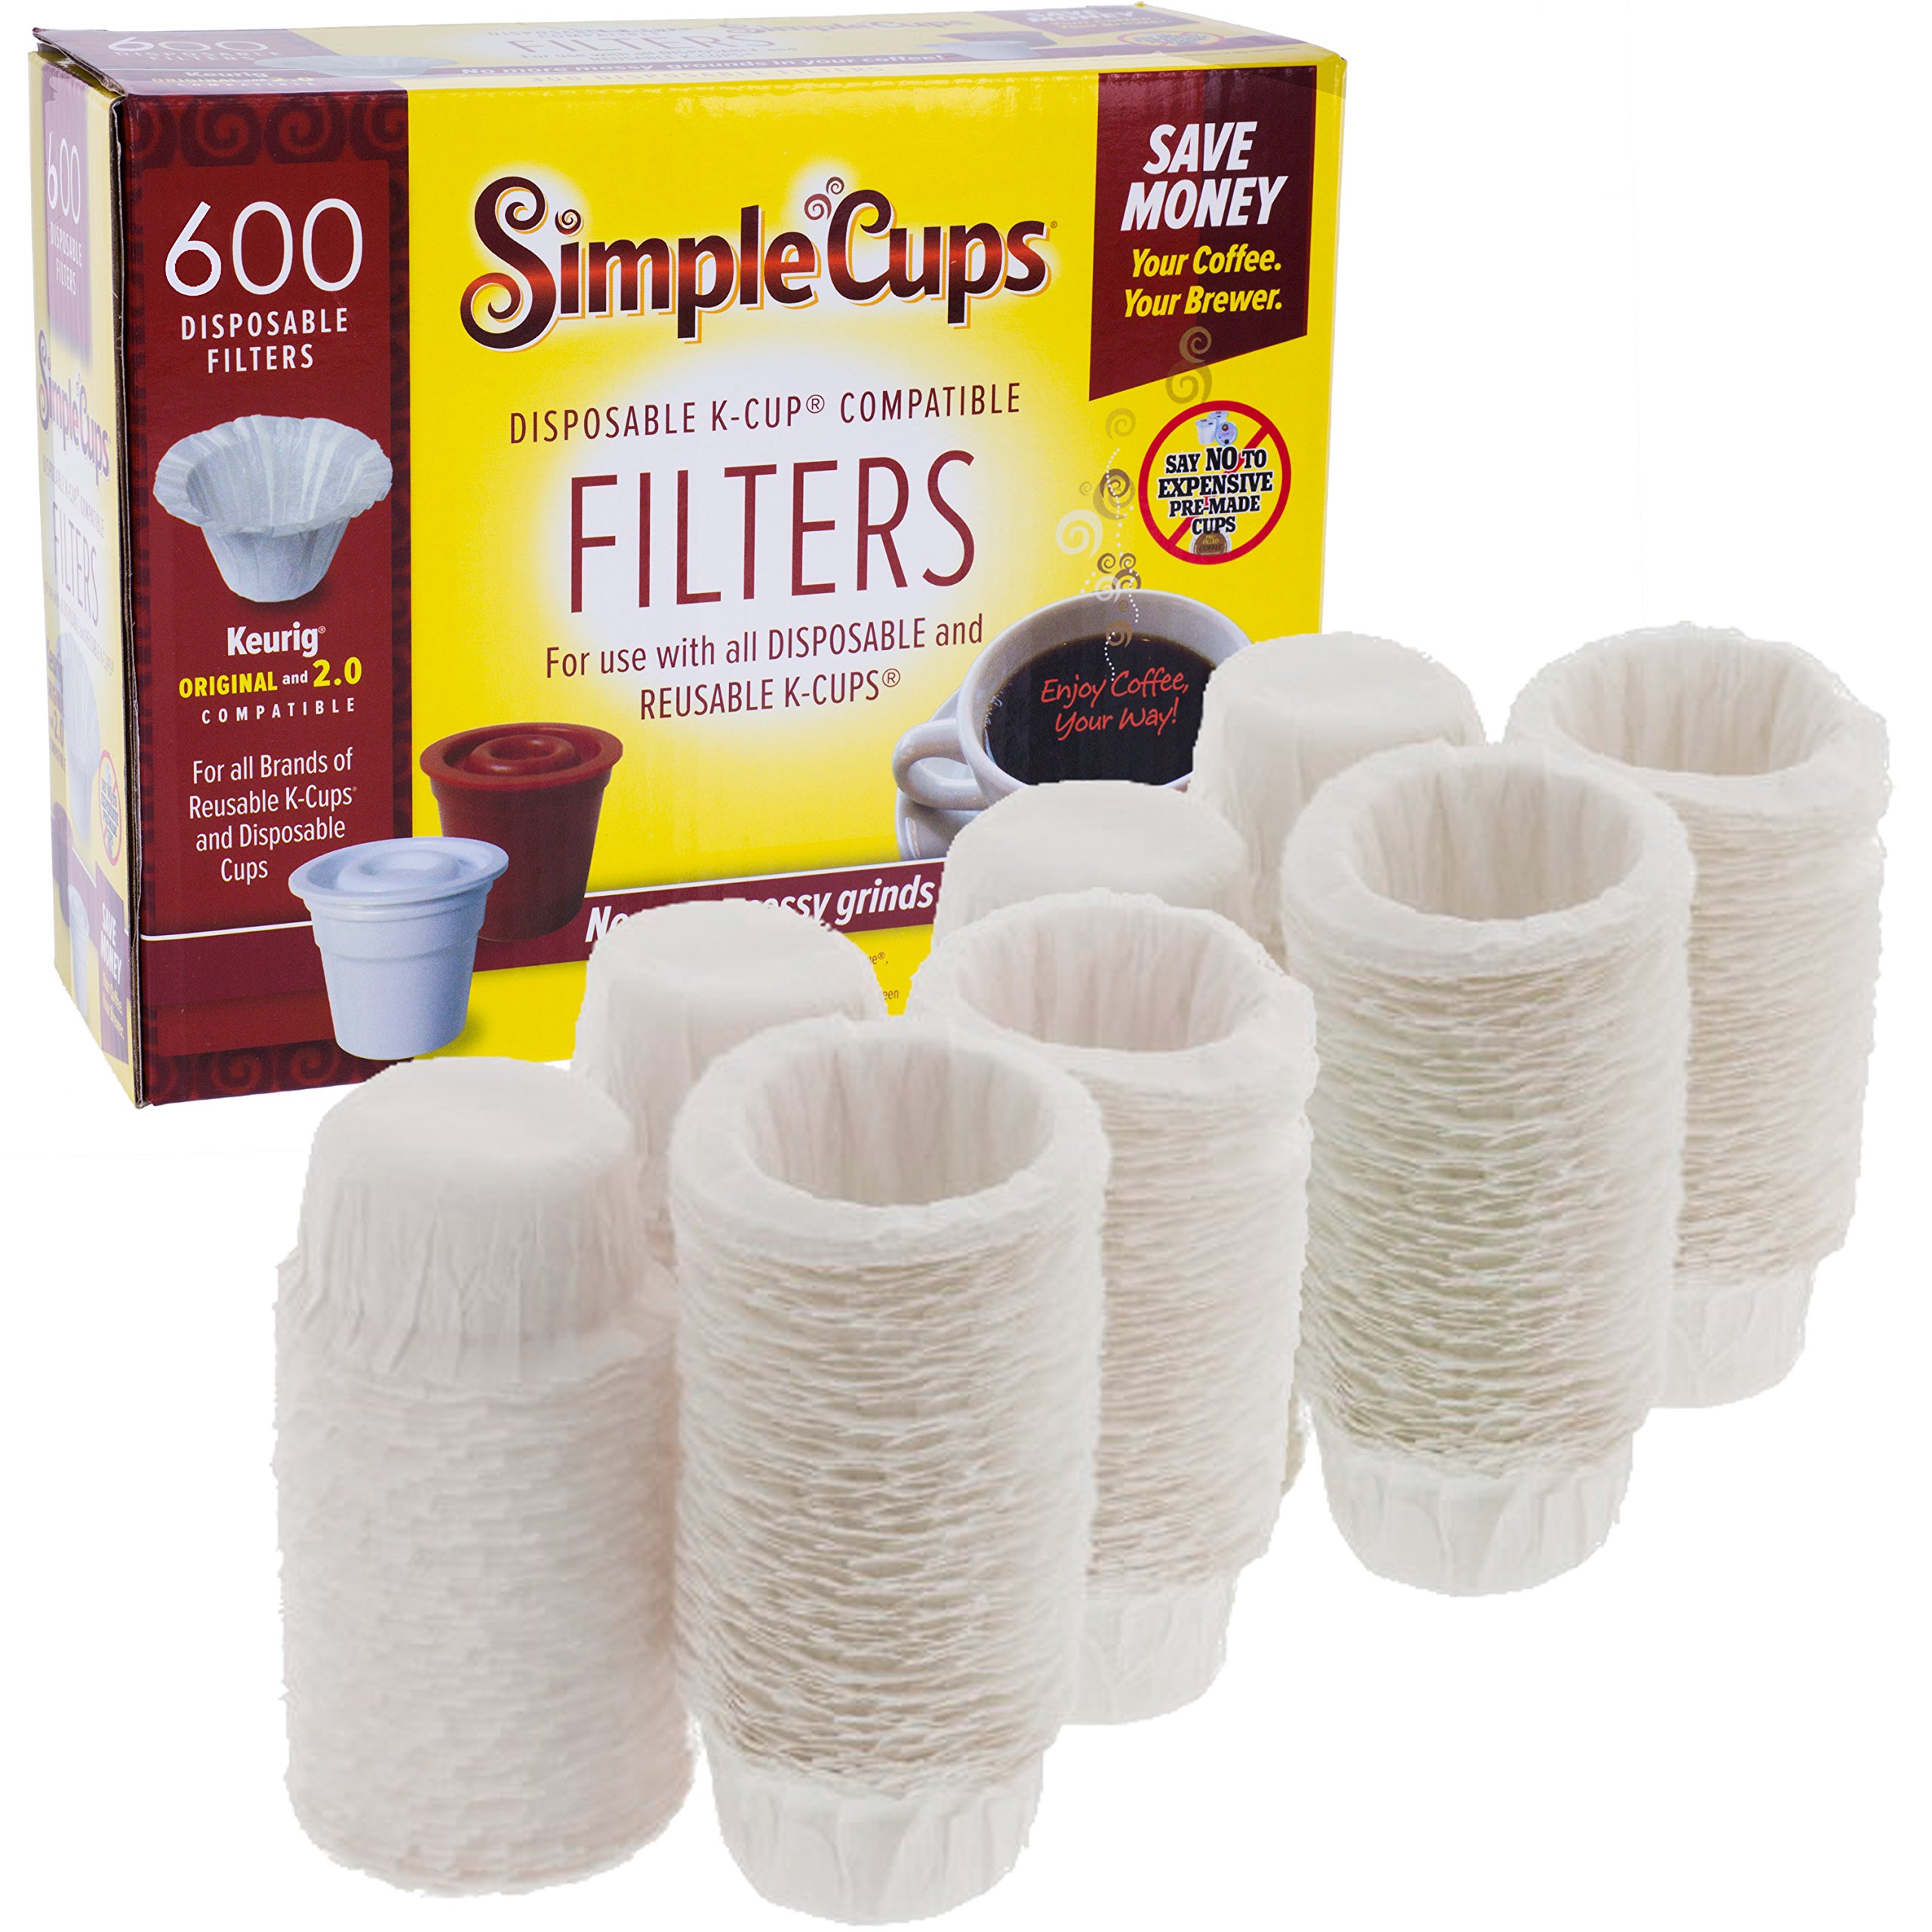 Book Cover Disposable Paper Coffee Filters 600 count - Compatible with Keurig, K-Cup machines & other Single Serve Coffee Brewer Reusable K Cups - Use Your Own Coffee & Make Your Own Pods - Works with All Brands